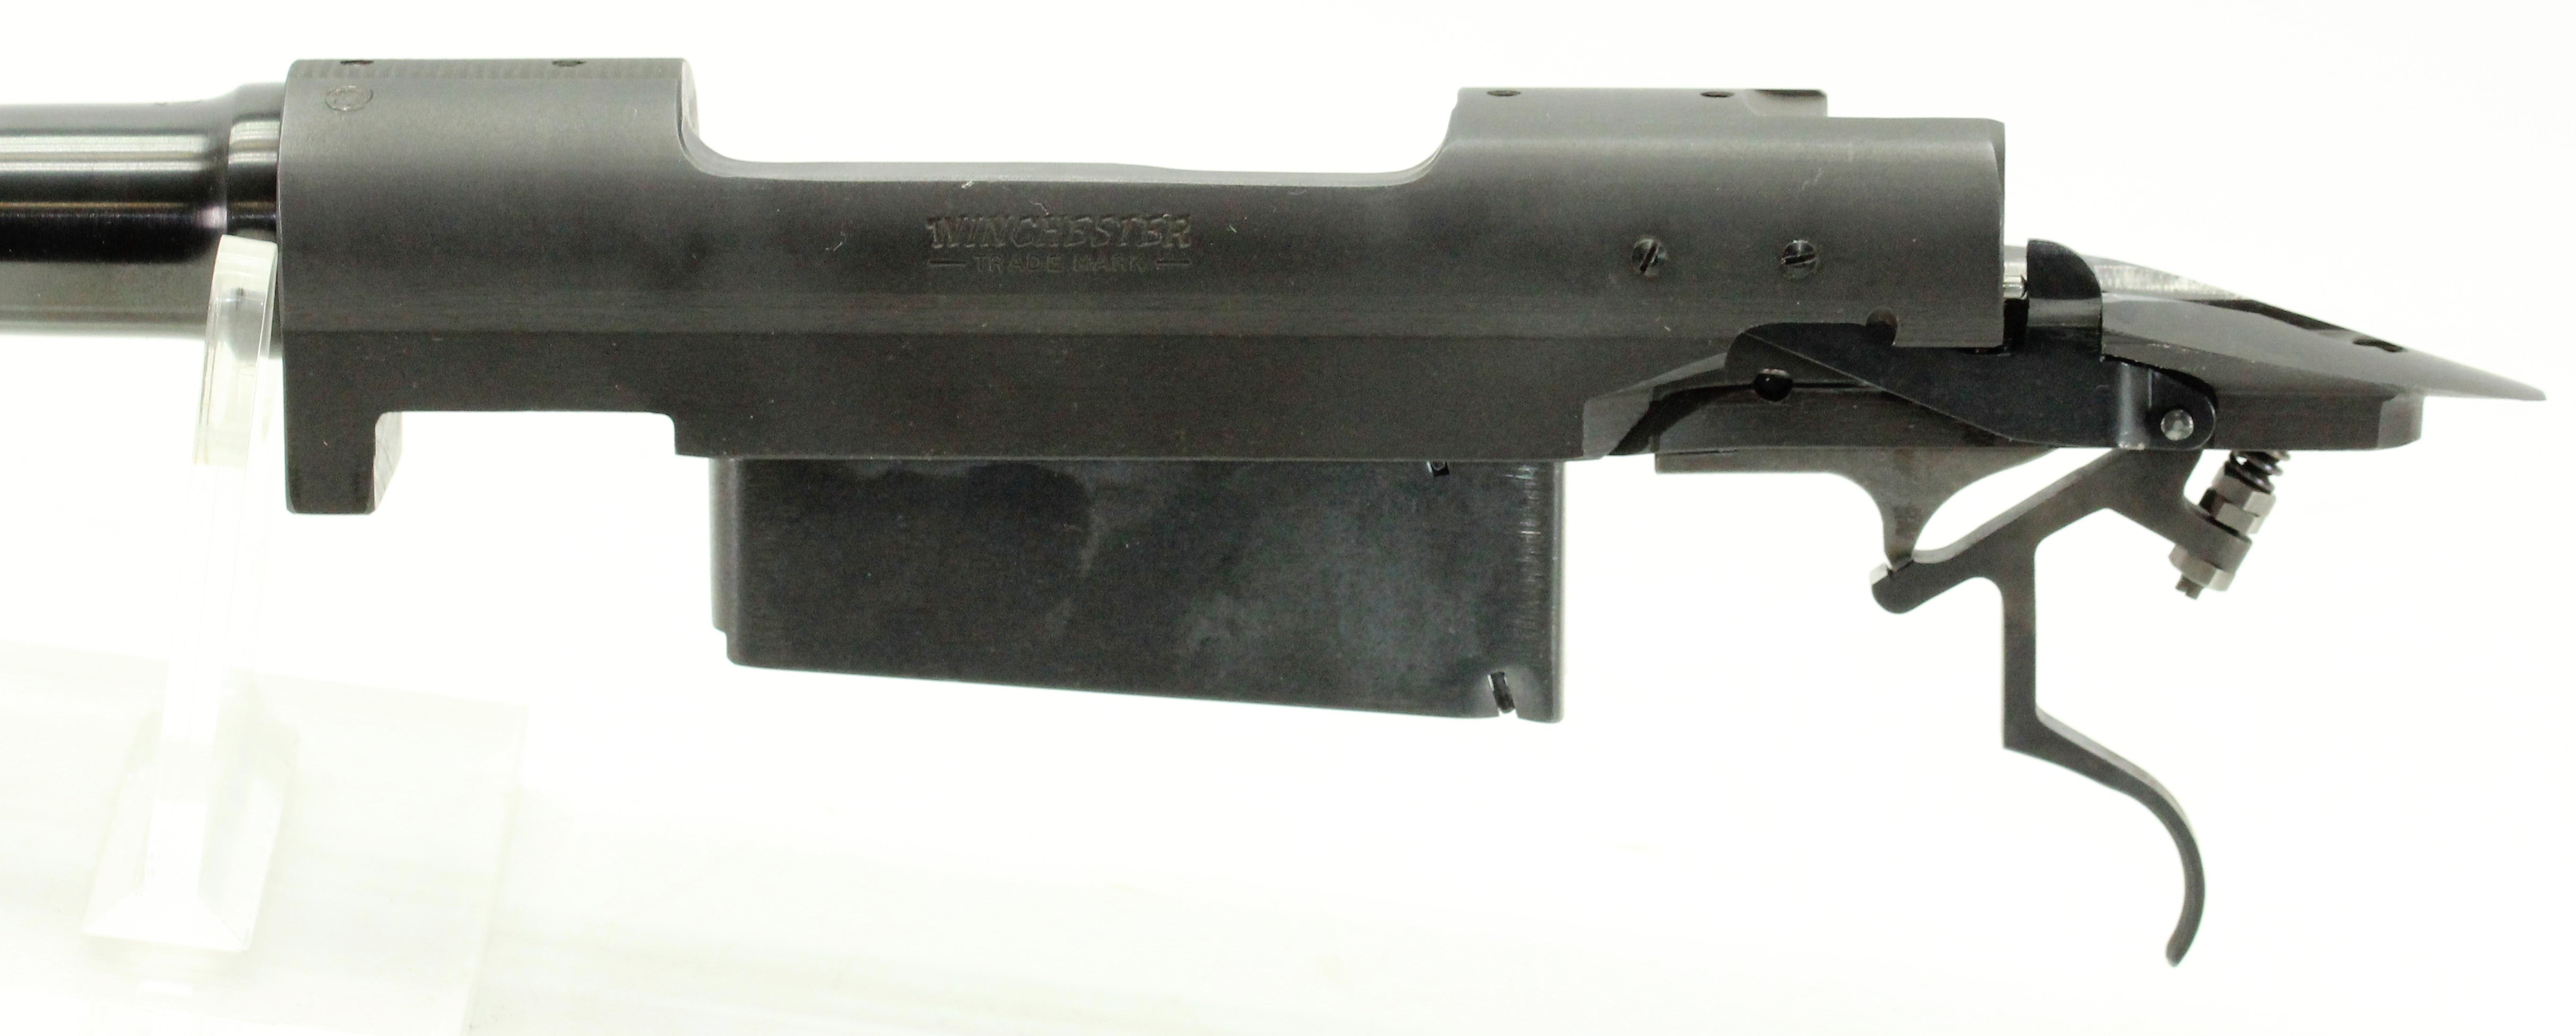 .243 Special Order "Gopher Special" Featherweight Rifle - 1962